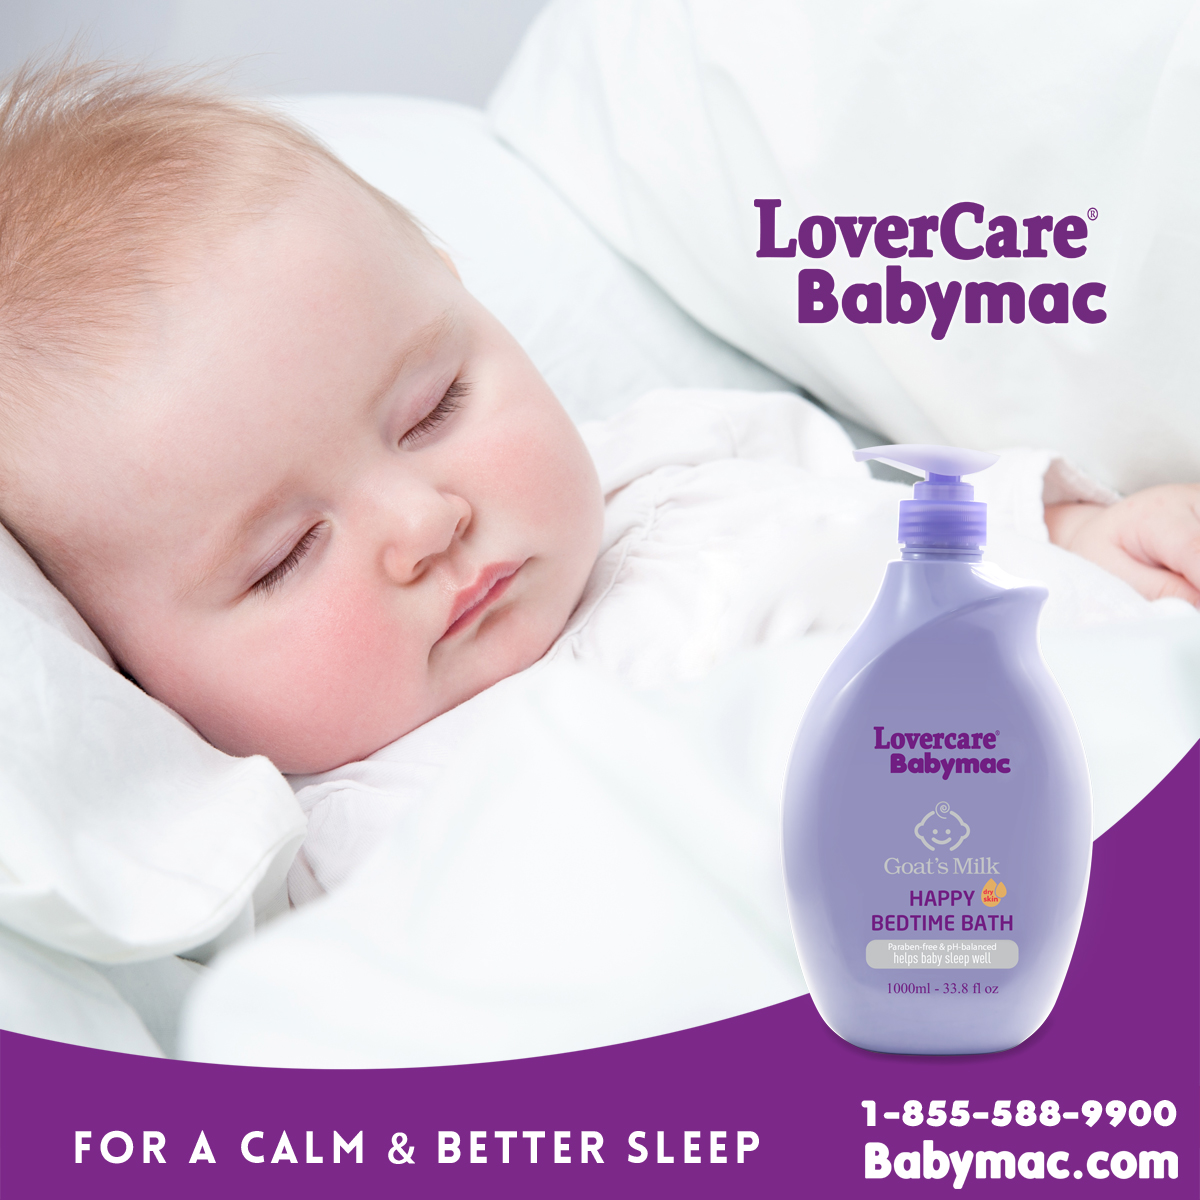 For a calm and better sleep🤱 A mild shower gel that's gentle on the skin. Use every evening as part of a night routine to promote better sleep. 100% soap-free, Dye-free, Paraben-free & pH-balanced. bit.ly/3X7xc9J #babyshampoo #babybath #washbaby #goatmilk #lovercare